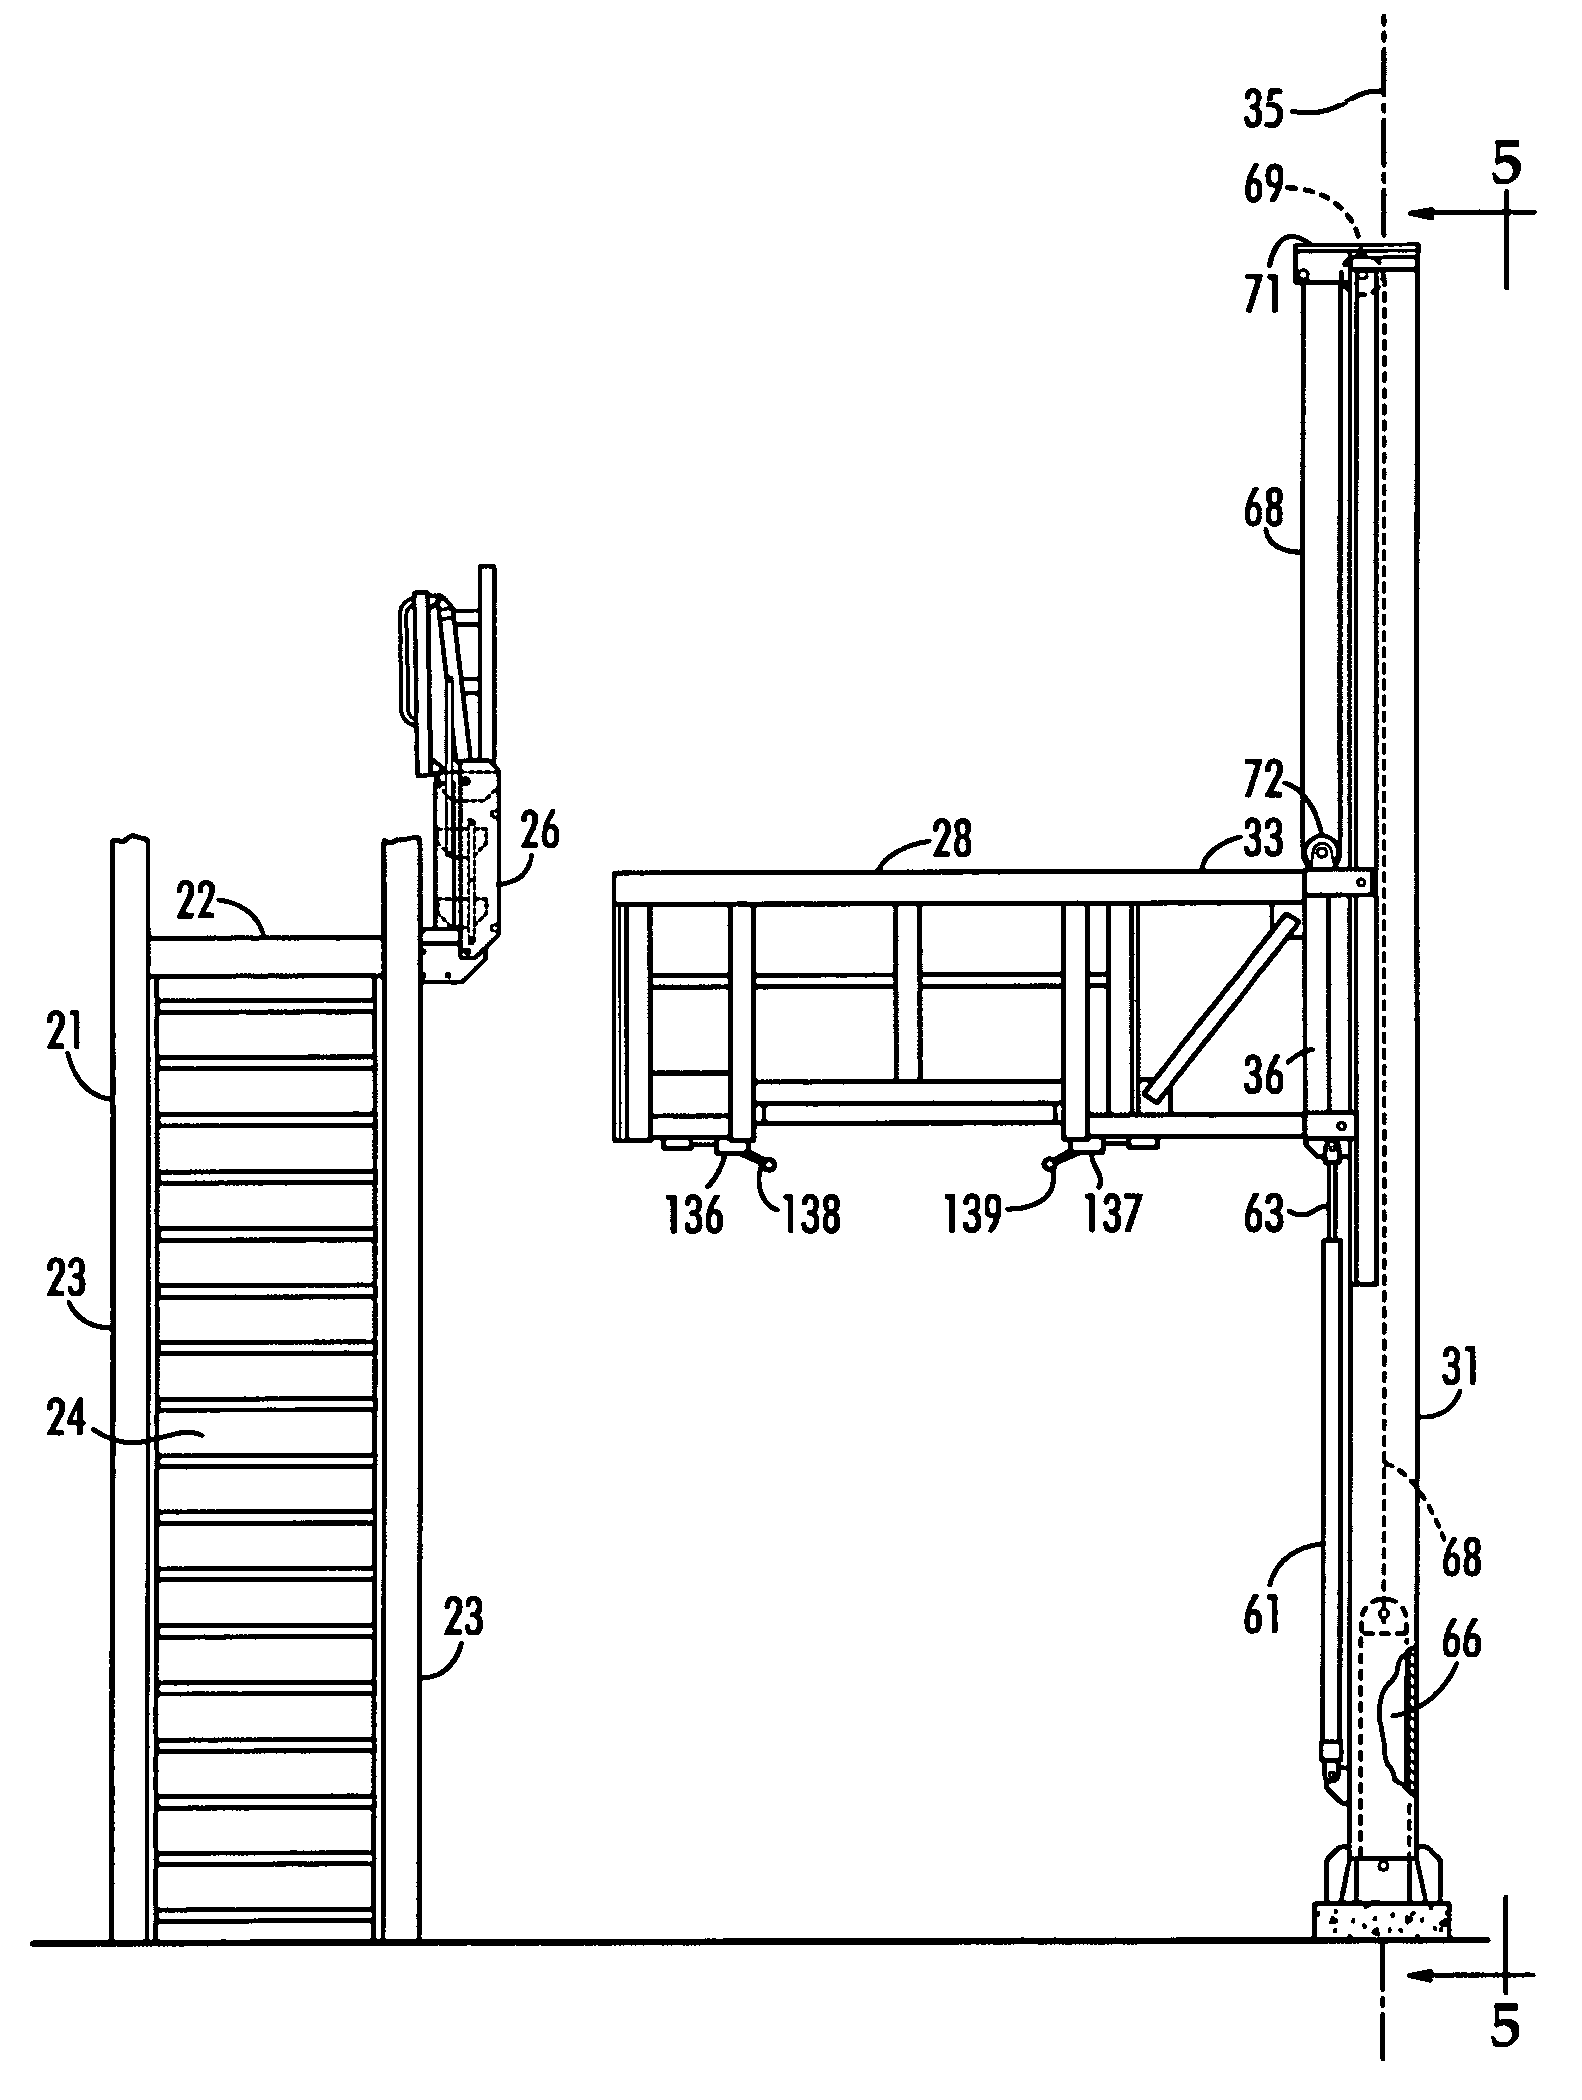 Bulk material transport vehicle access structure